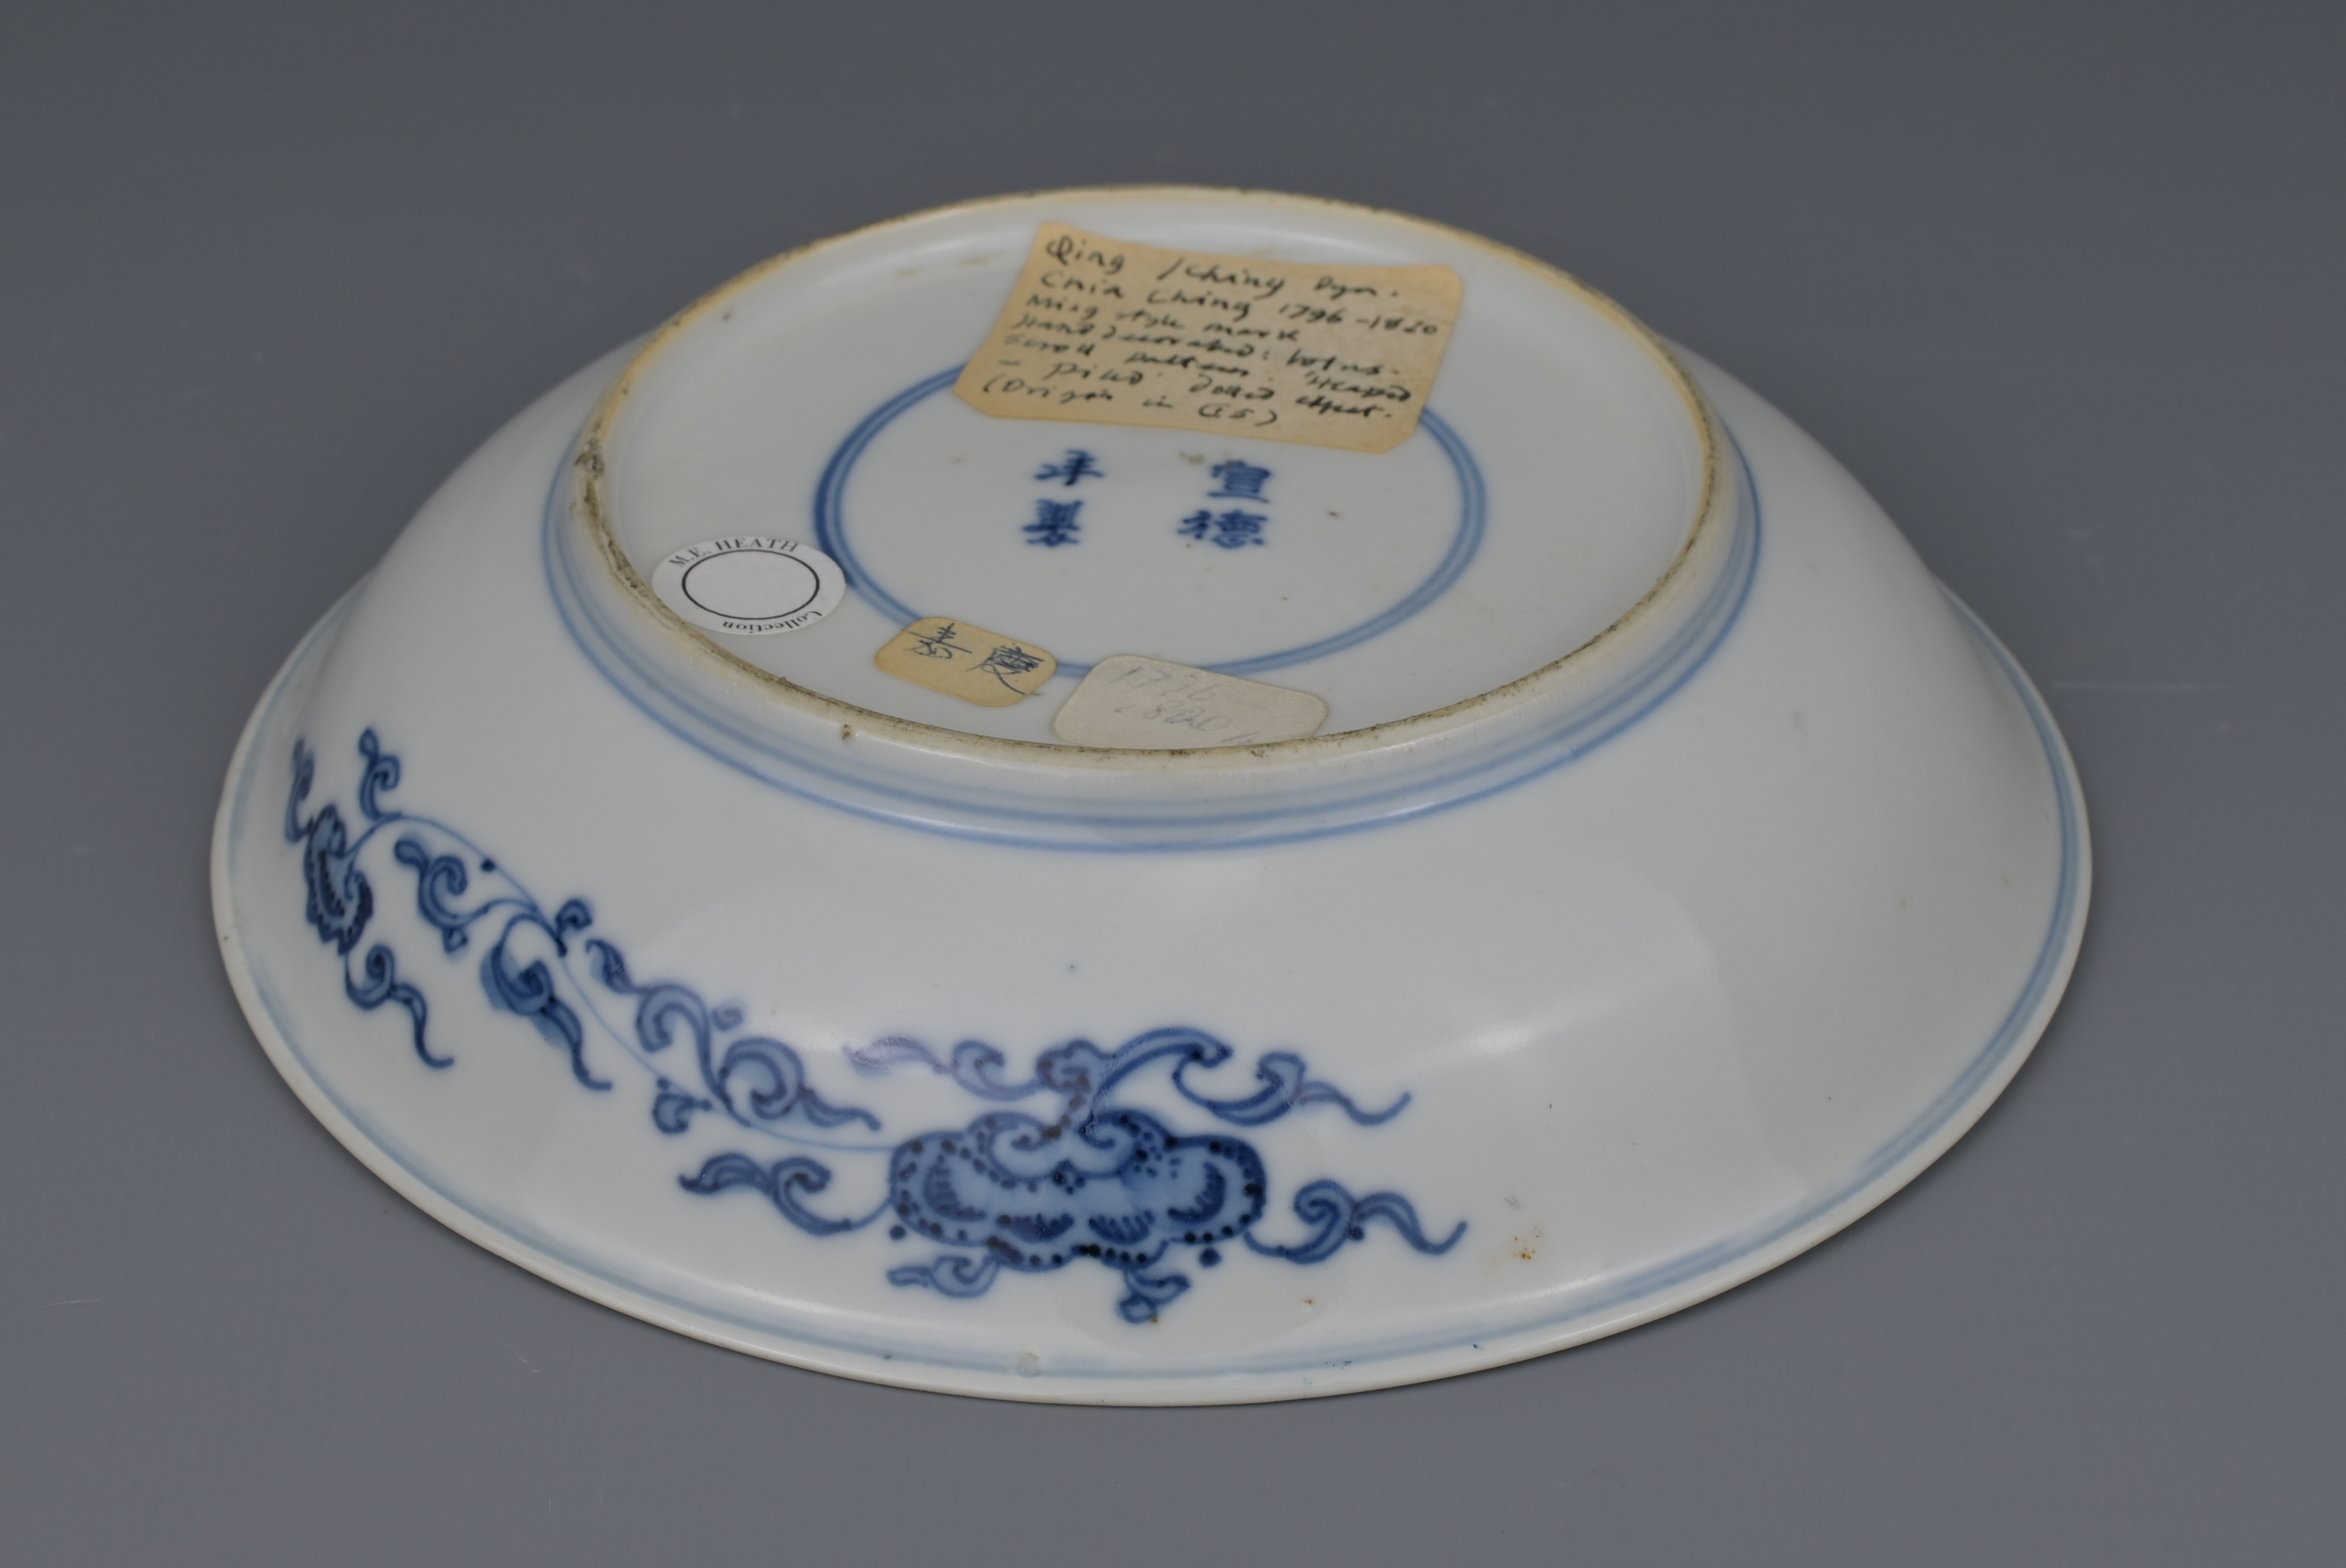 CHINESE BLUE AND WHITE PORCELAIN DISH, JIAQING PERIOD, EARLY 19th CENTURY - Image 7 of 9